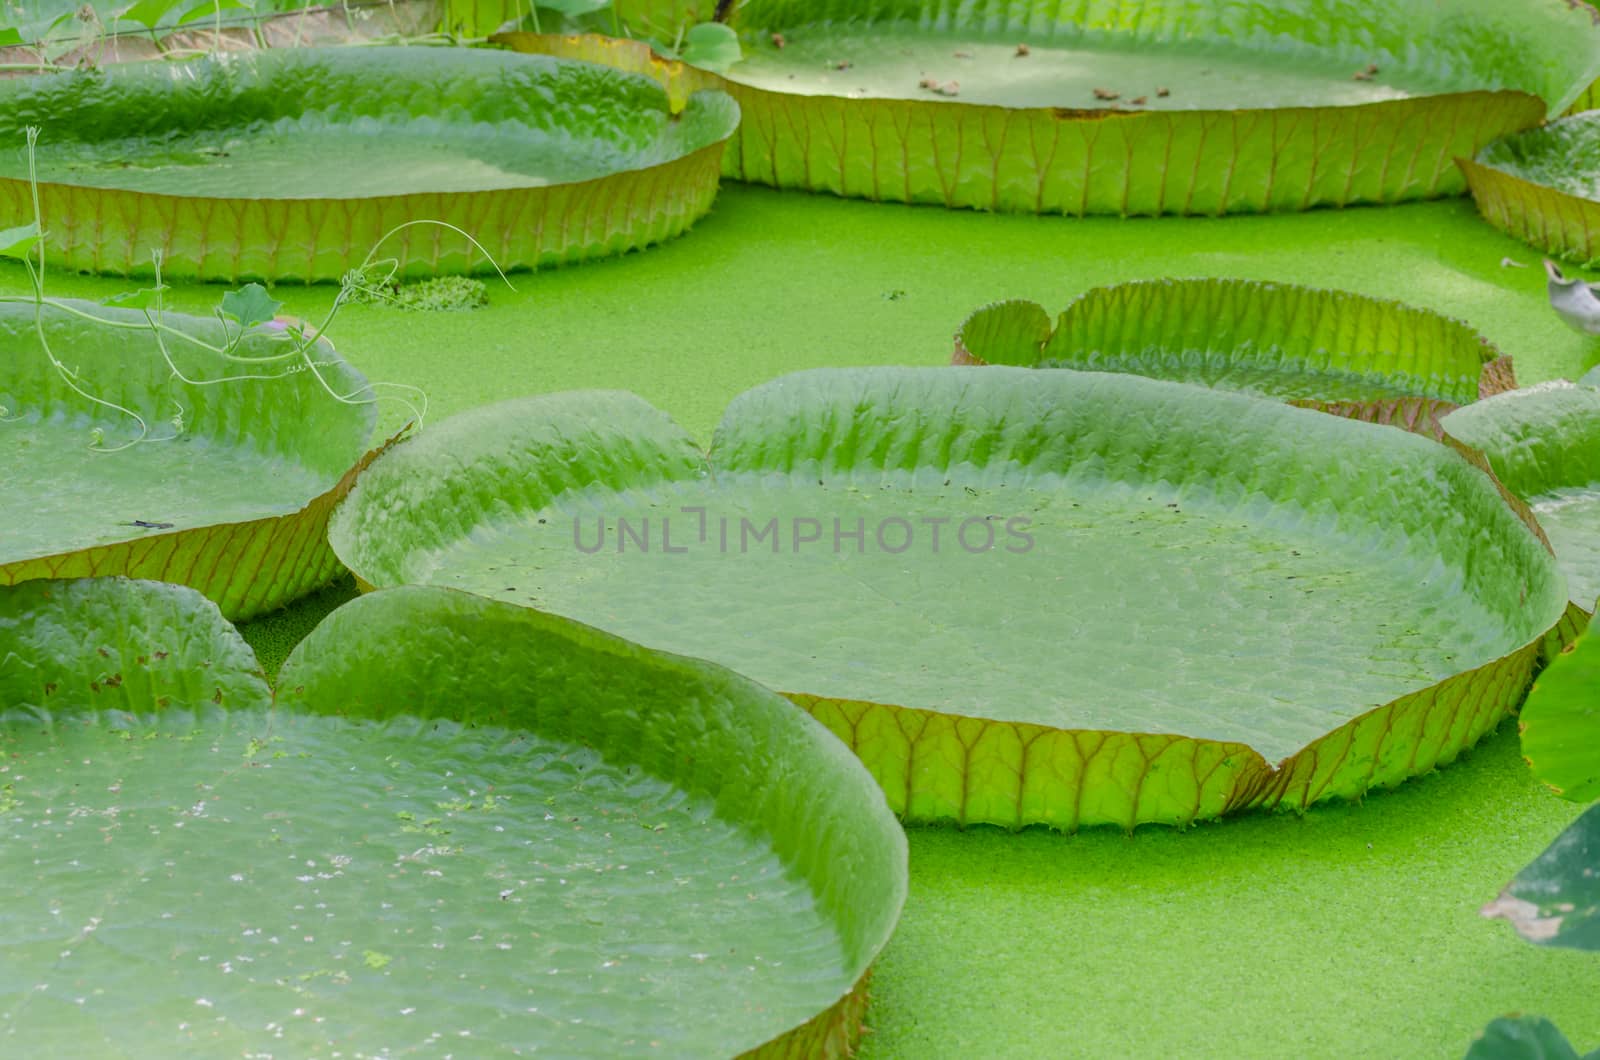 The large leaves of the Victoria waterlily or Amazon water lily called.